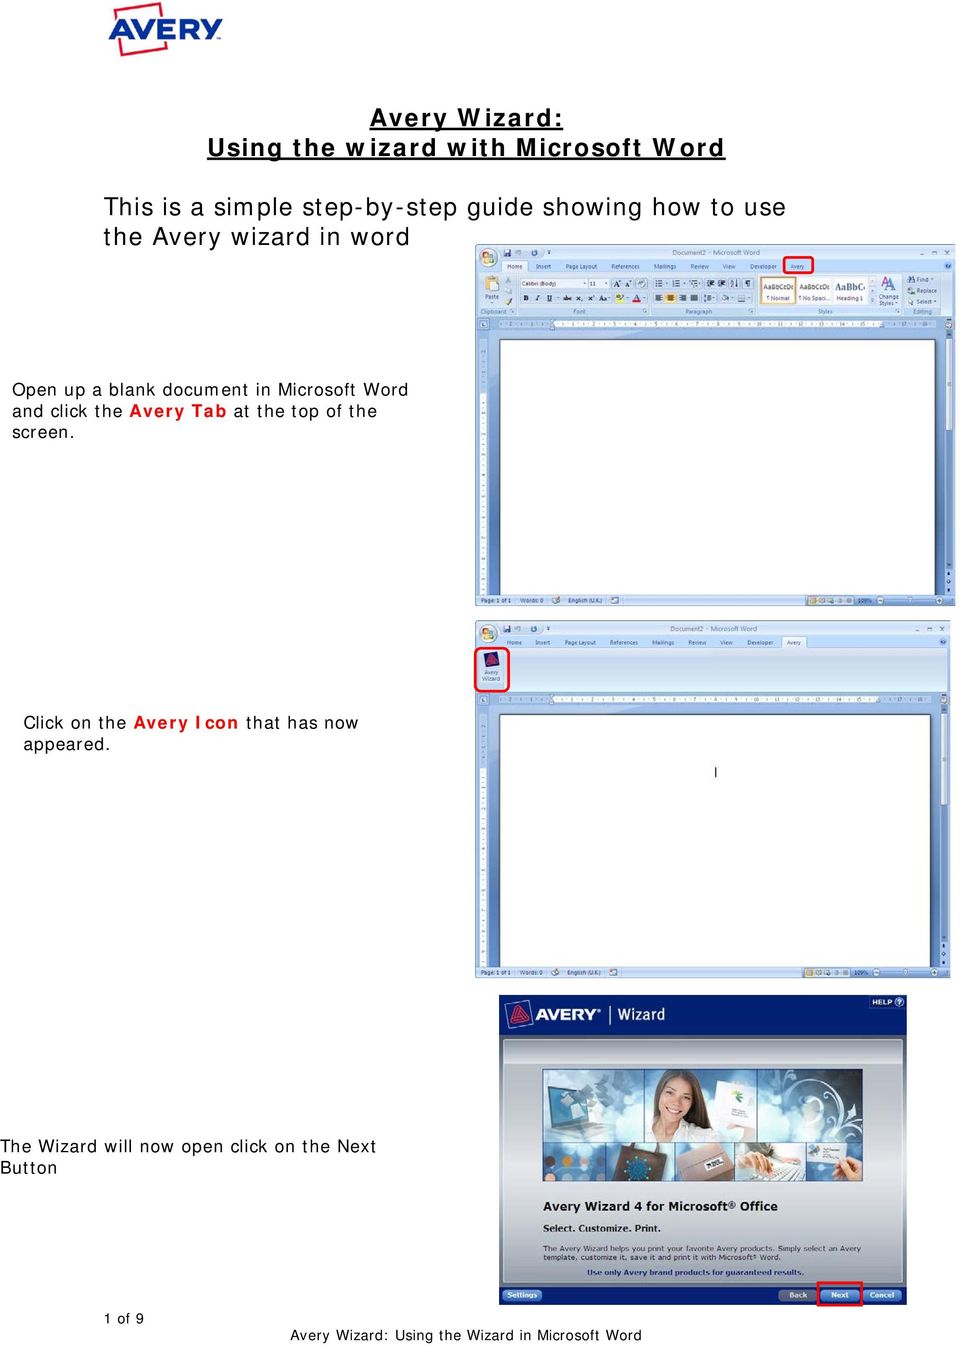 Microsoft Word and click the Avery Tab at the top of the screen.